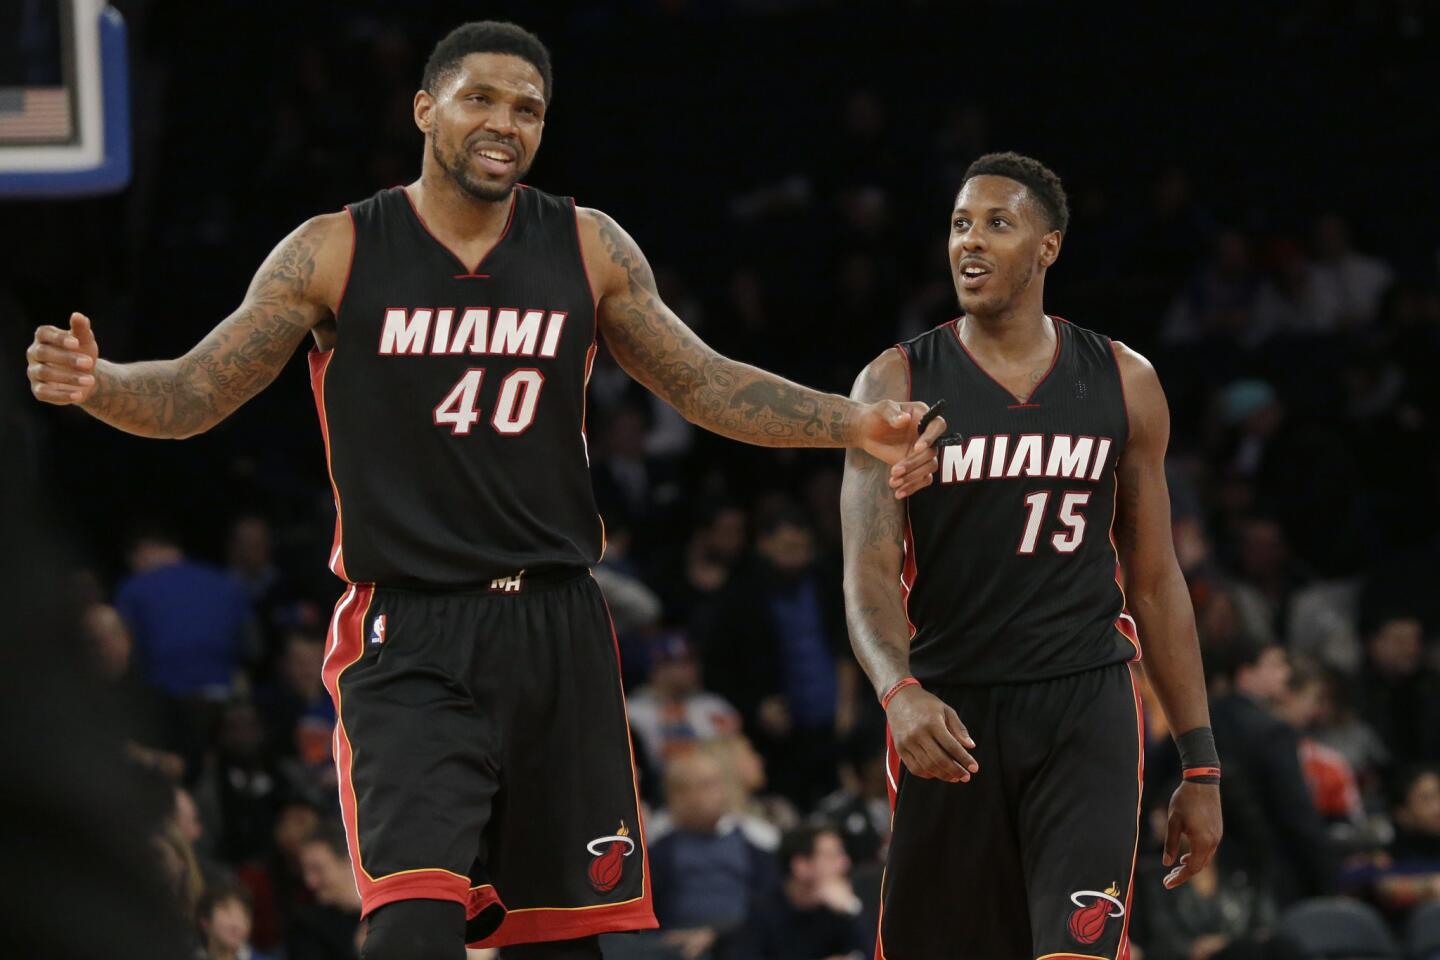 Miami Heat's Udonis Haslem (40) and guard Mario Chalmers react at the end of an NBA basketball game against the New York Knicks, Friday, Feb. 20, 2015, at Madison Square Garden in New York. The Heat won 111-87. (AP Photo/Mary Altaffer)